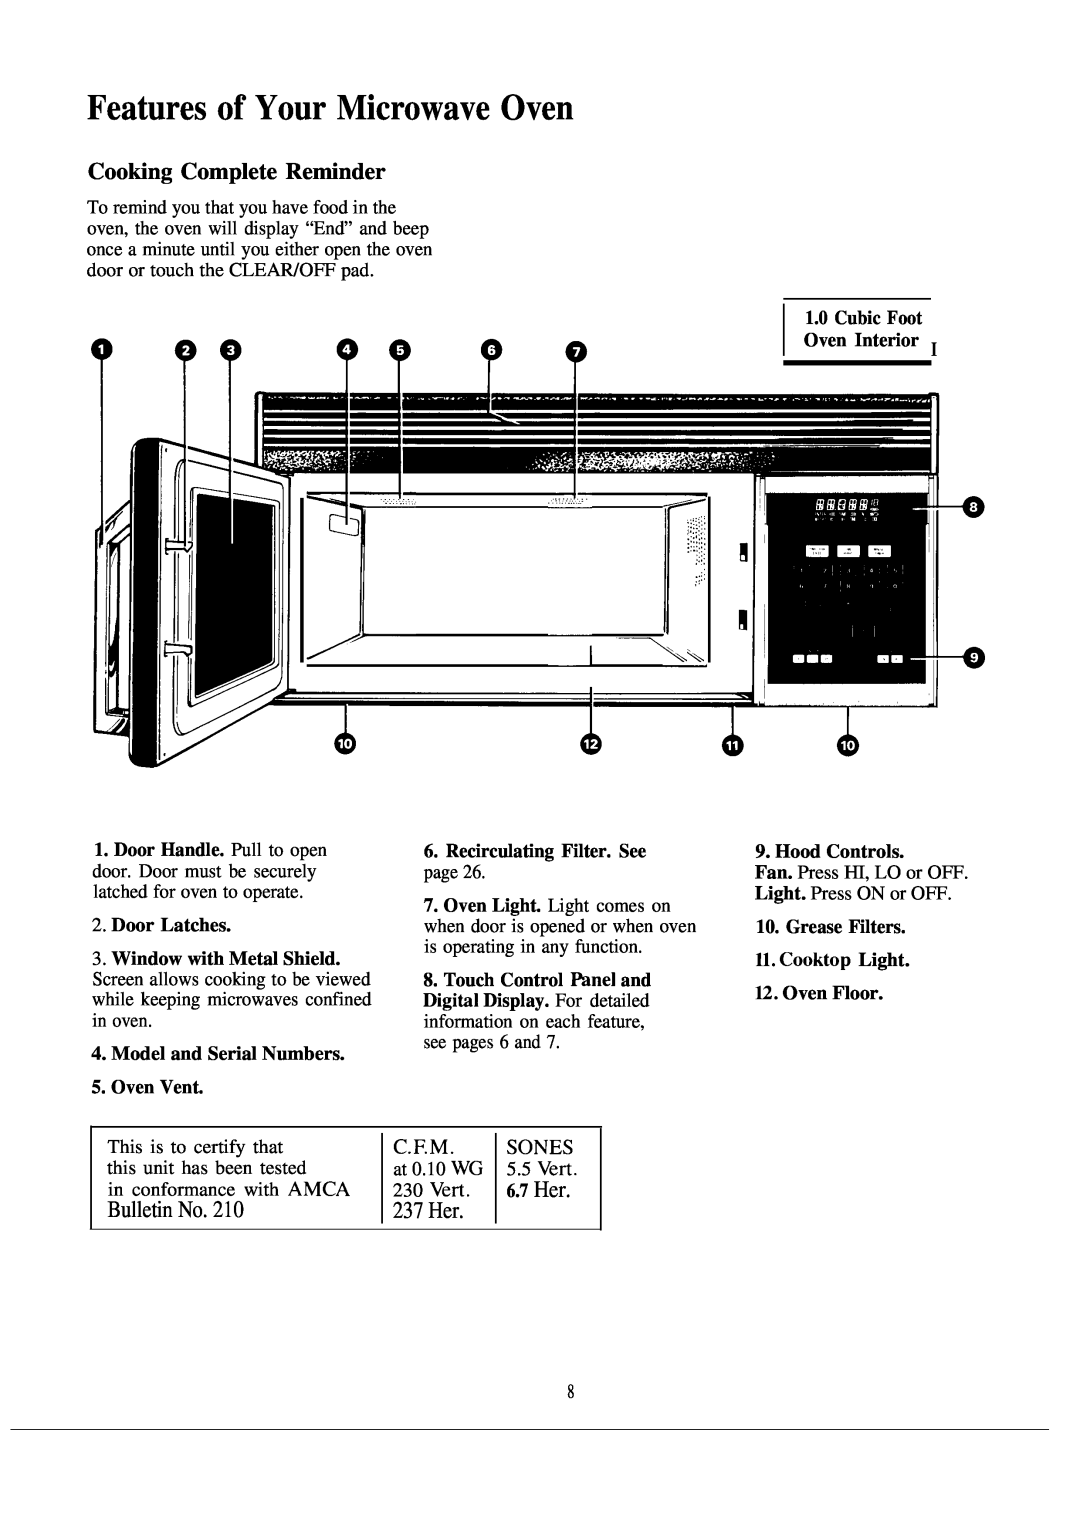 GE 164 D2092P127 Features of Your Microwave Oven, Cooking Complete Reminder, Bulletin No, 237 Her, Door Latches, 6.7 Her 